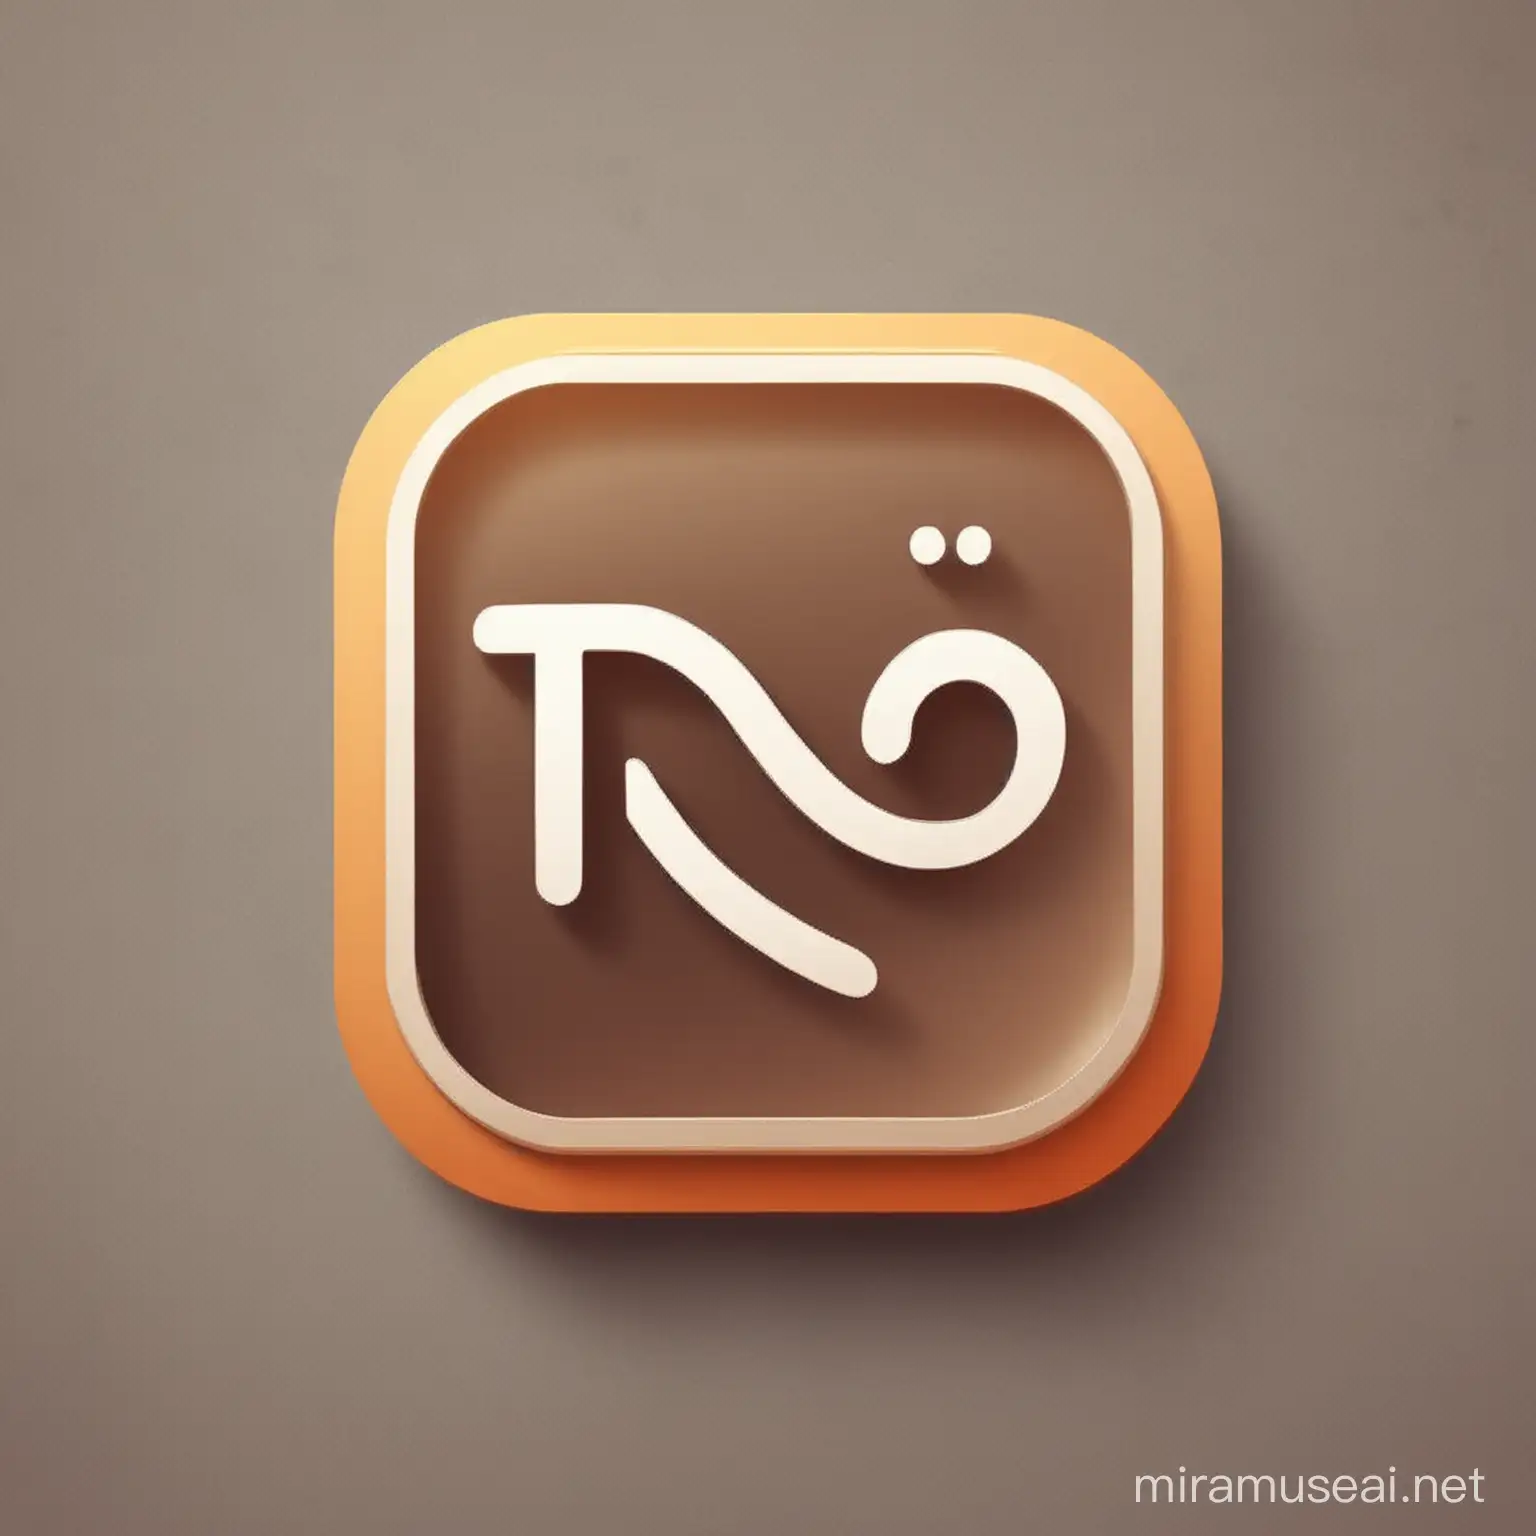 to do app logo named: "to do app" in png format 